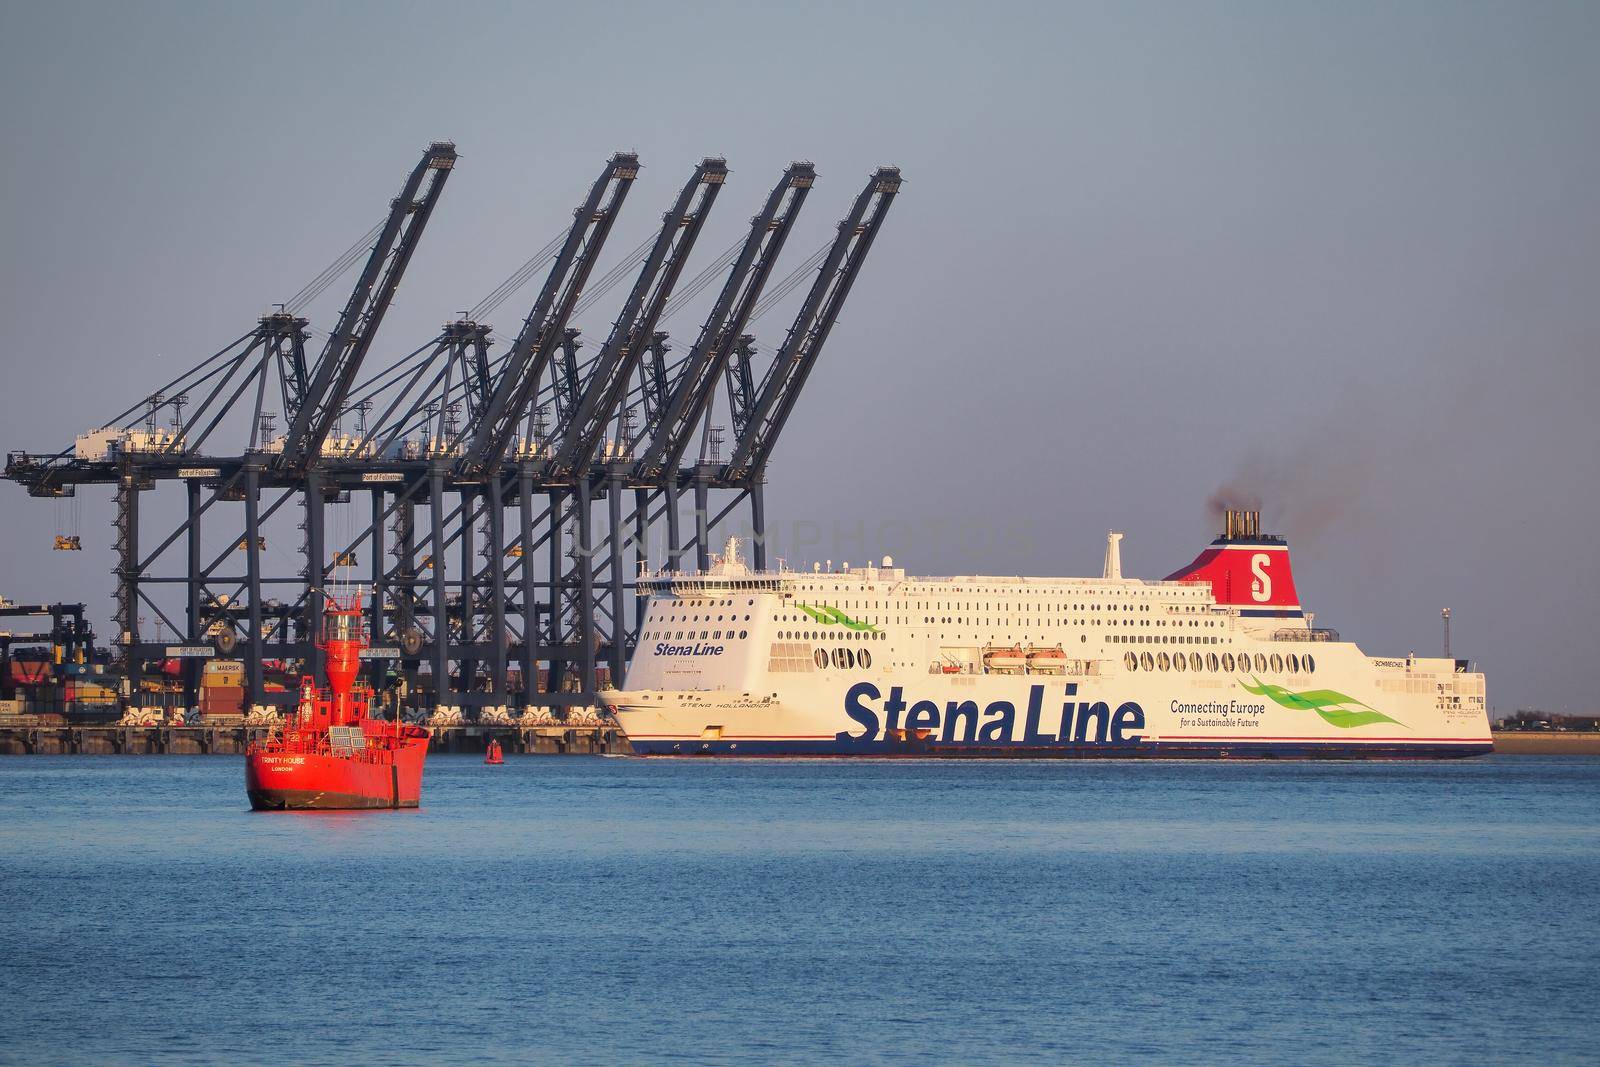 Shotley Point, Suffolk, UK, April 12 2021: Stena Line ferry Stena Hollandica steaming past the Port of Felixstowe dock cranes and red lightship at dusk